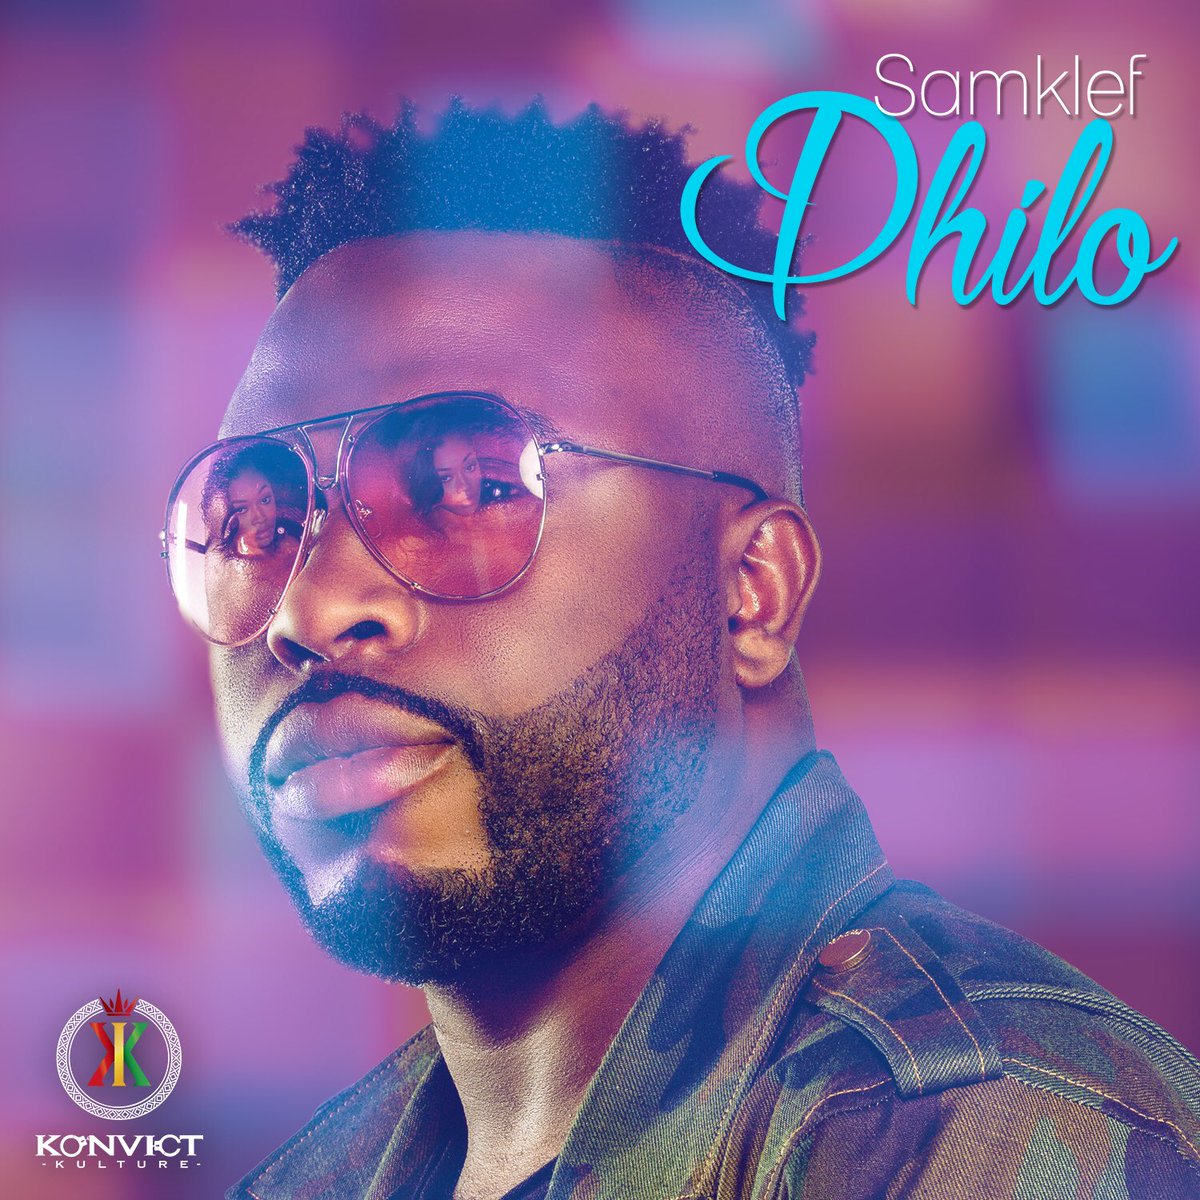 RT @KonvictKulture: #NewMusic and Video for Philo from @SAMKLEF dropping this Thursday ???????????????? https://t.co/PHGsu9jdR7